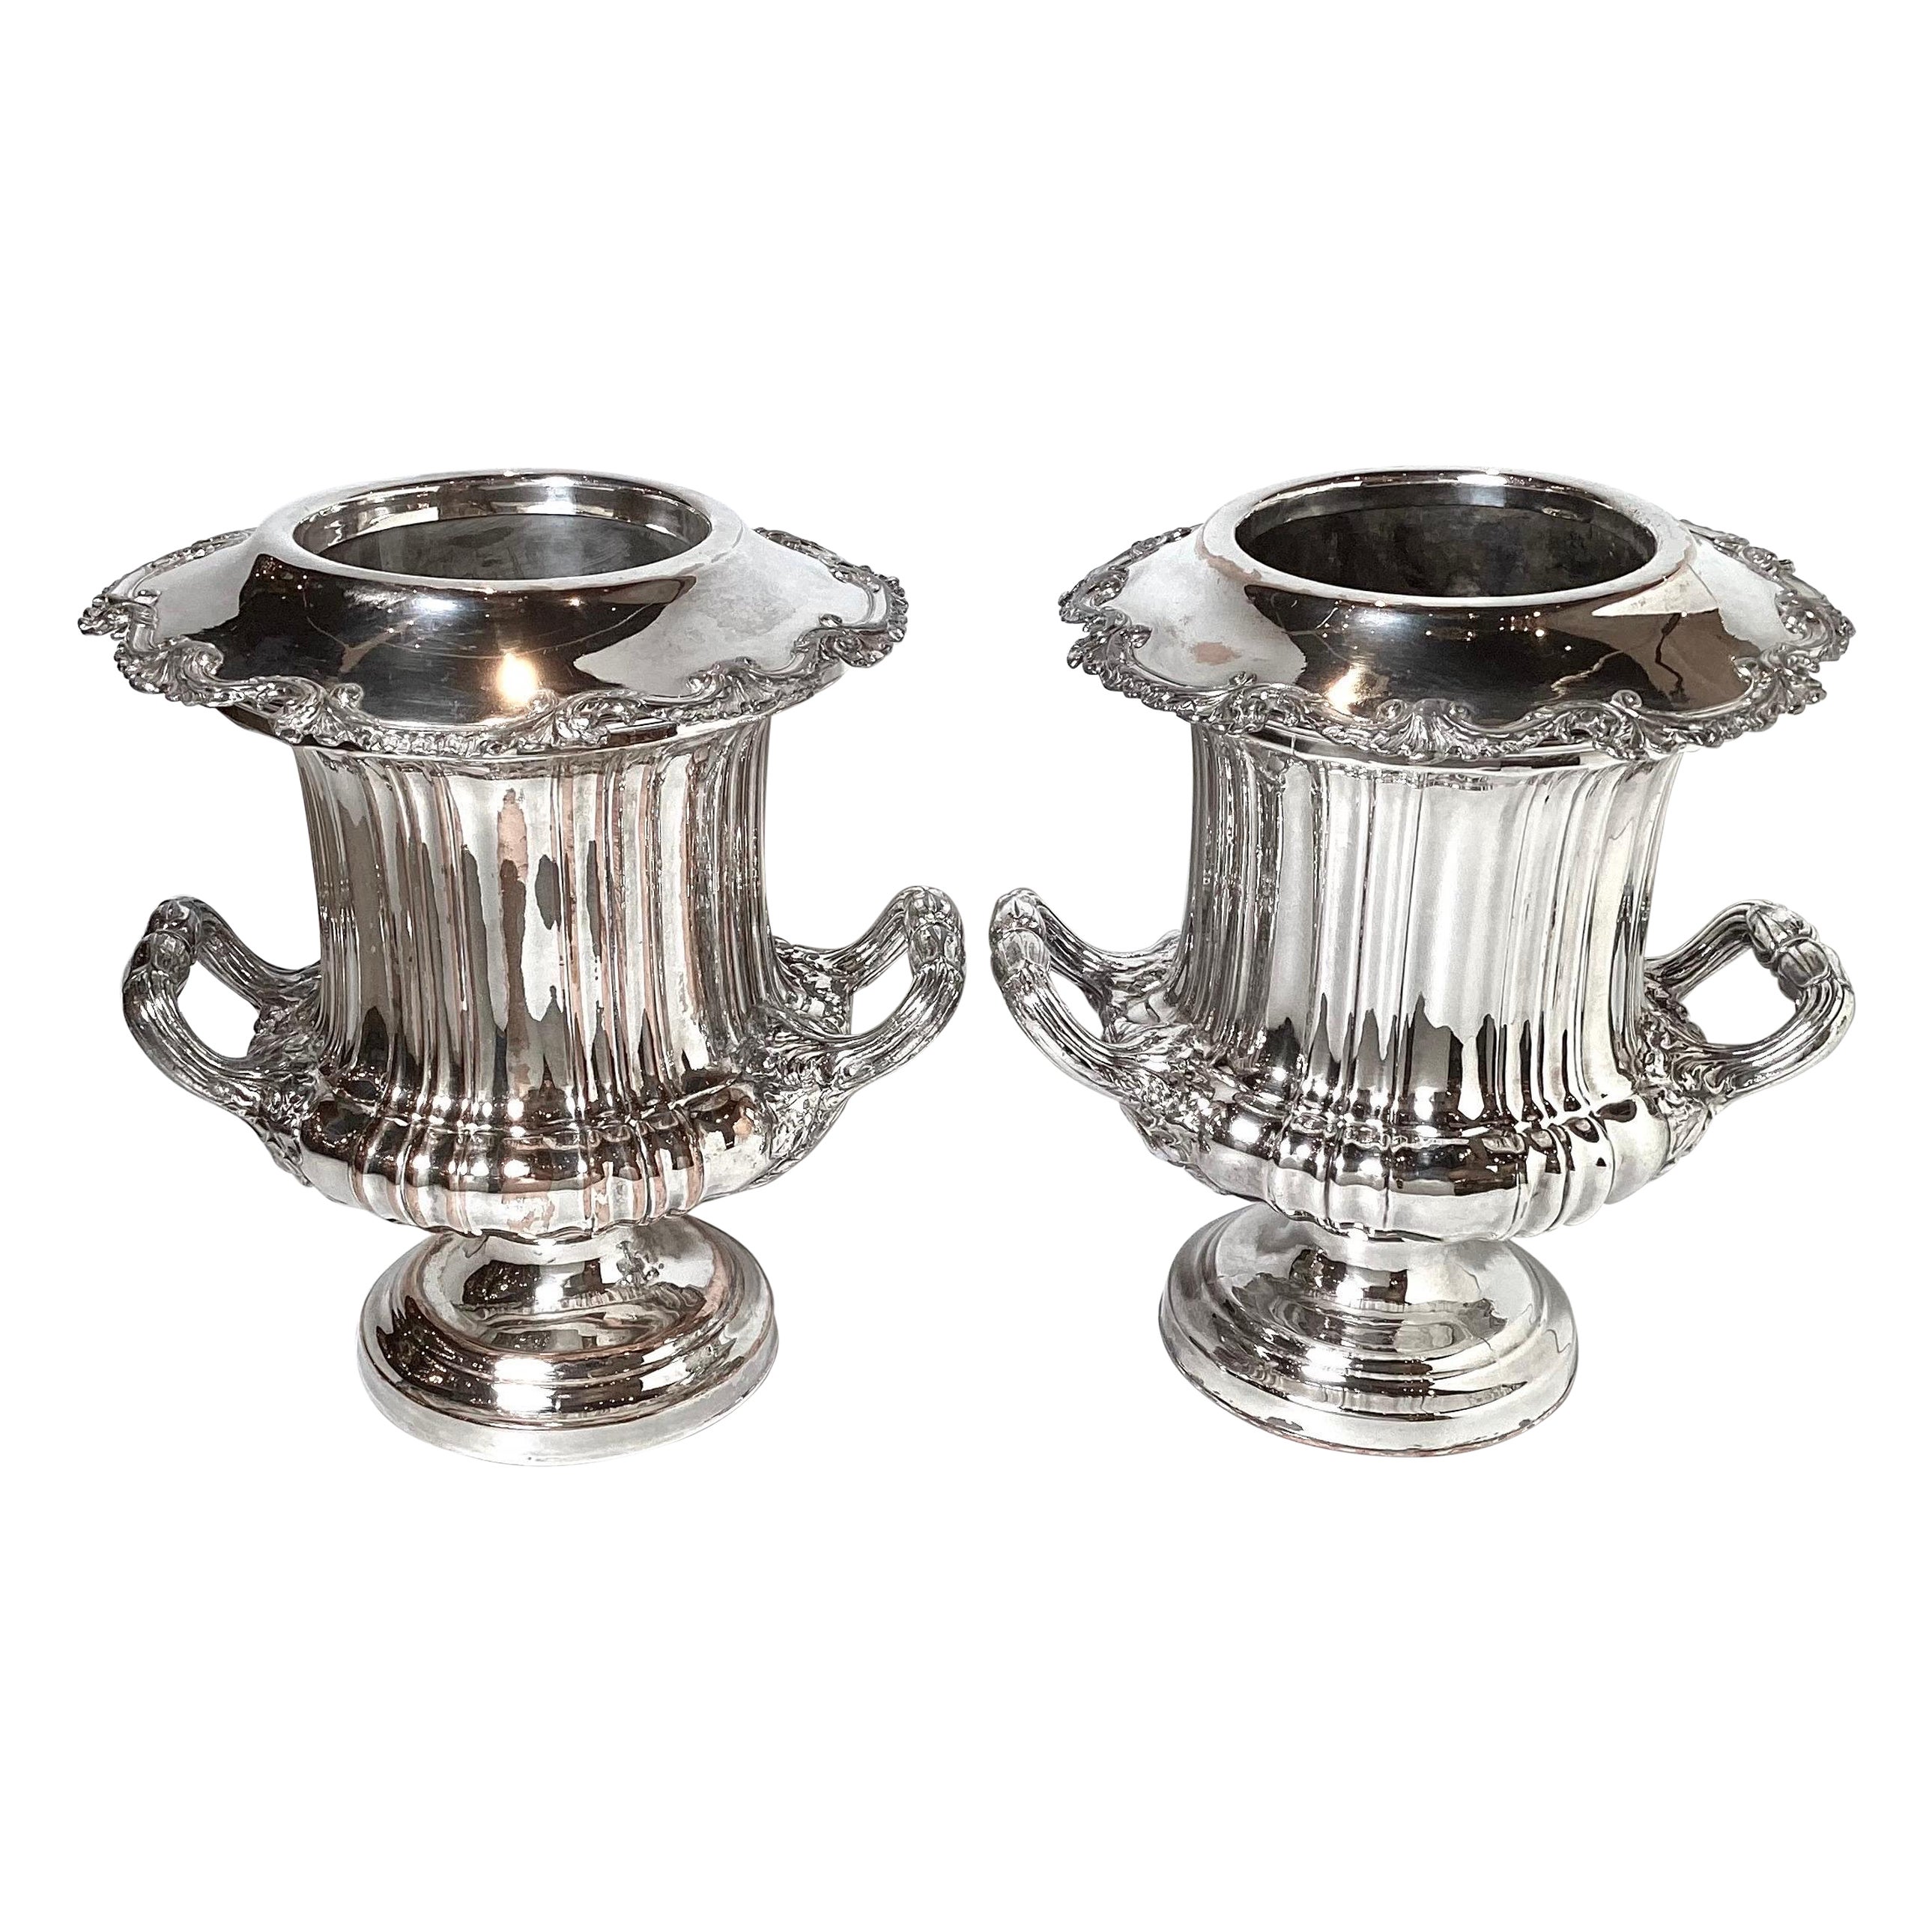 Pair of Silver Plated Copper Campana Urn Champaigne Coolers